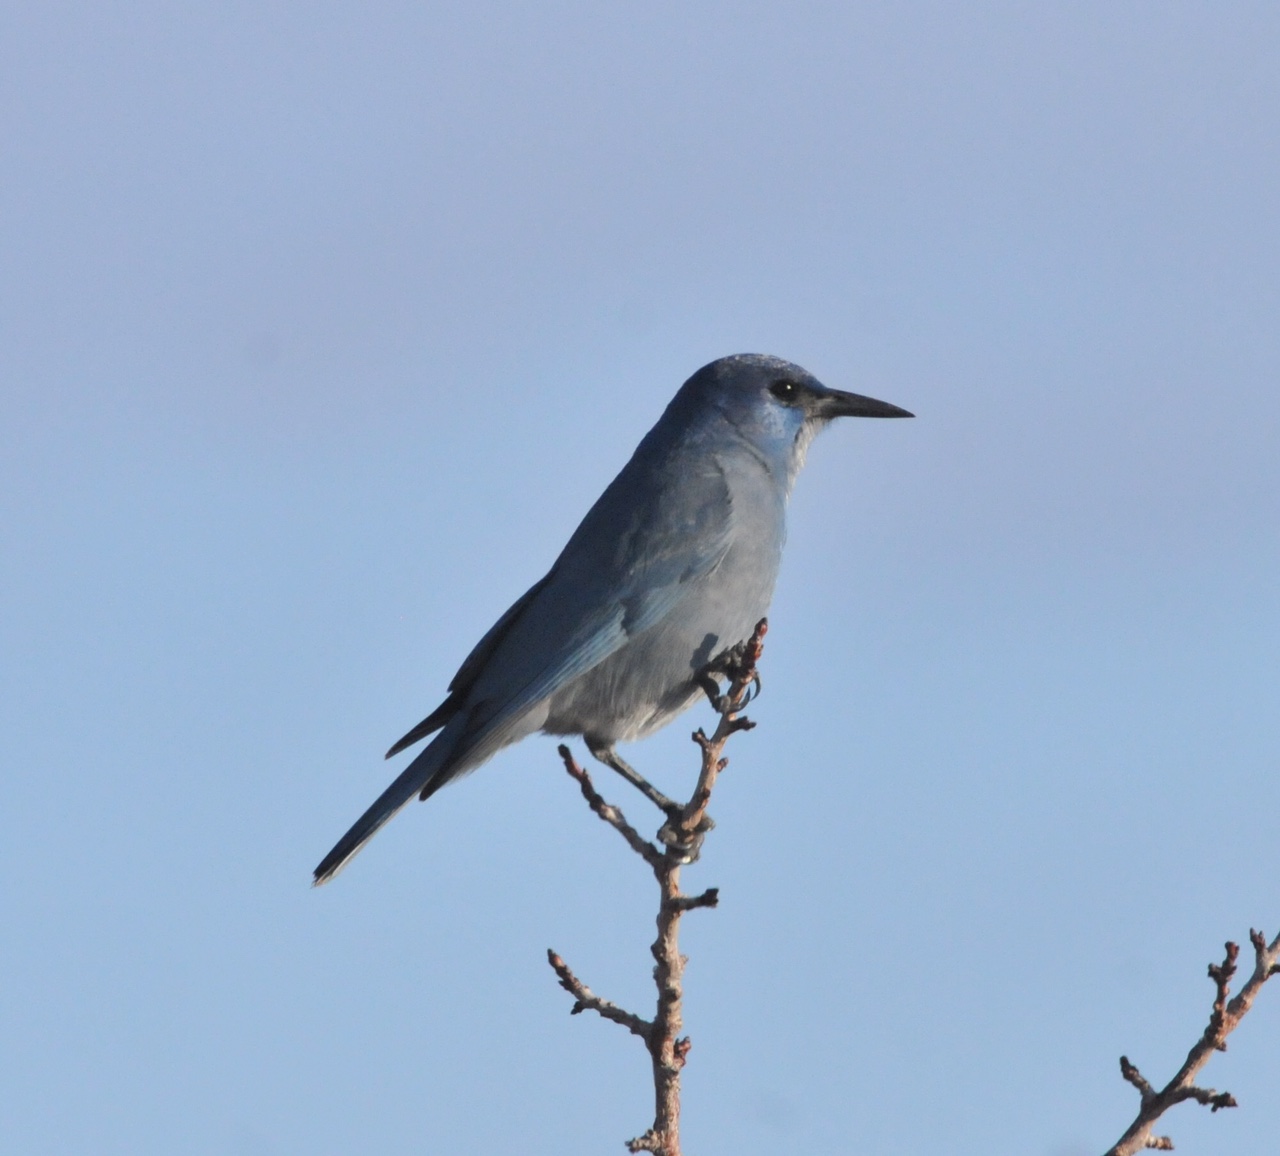 Large blue-gray bird perched on branch